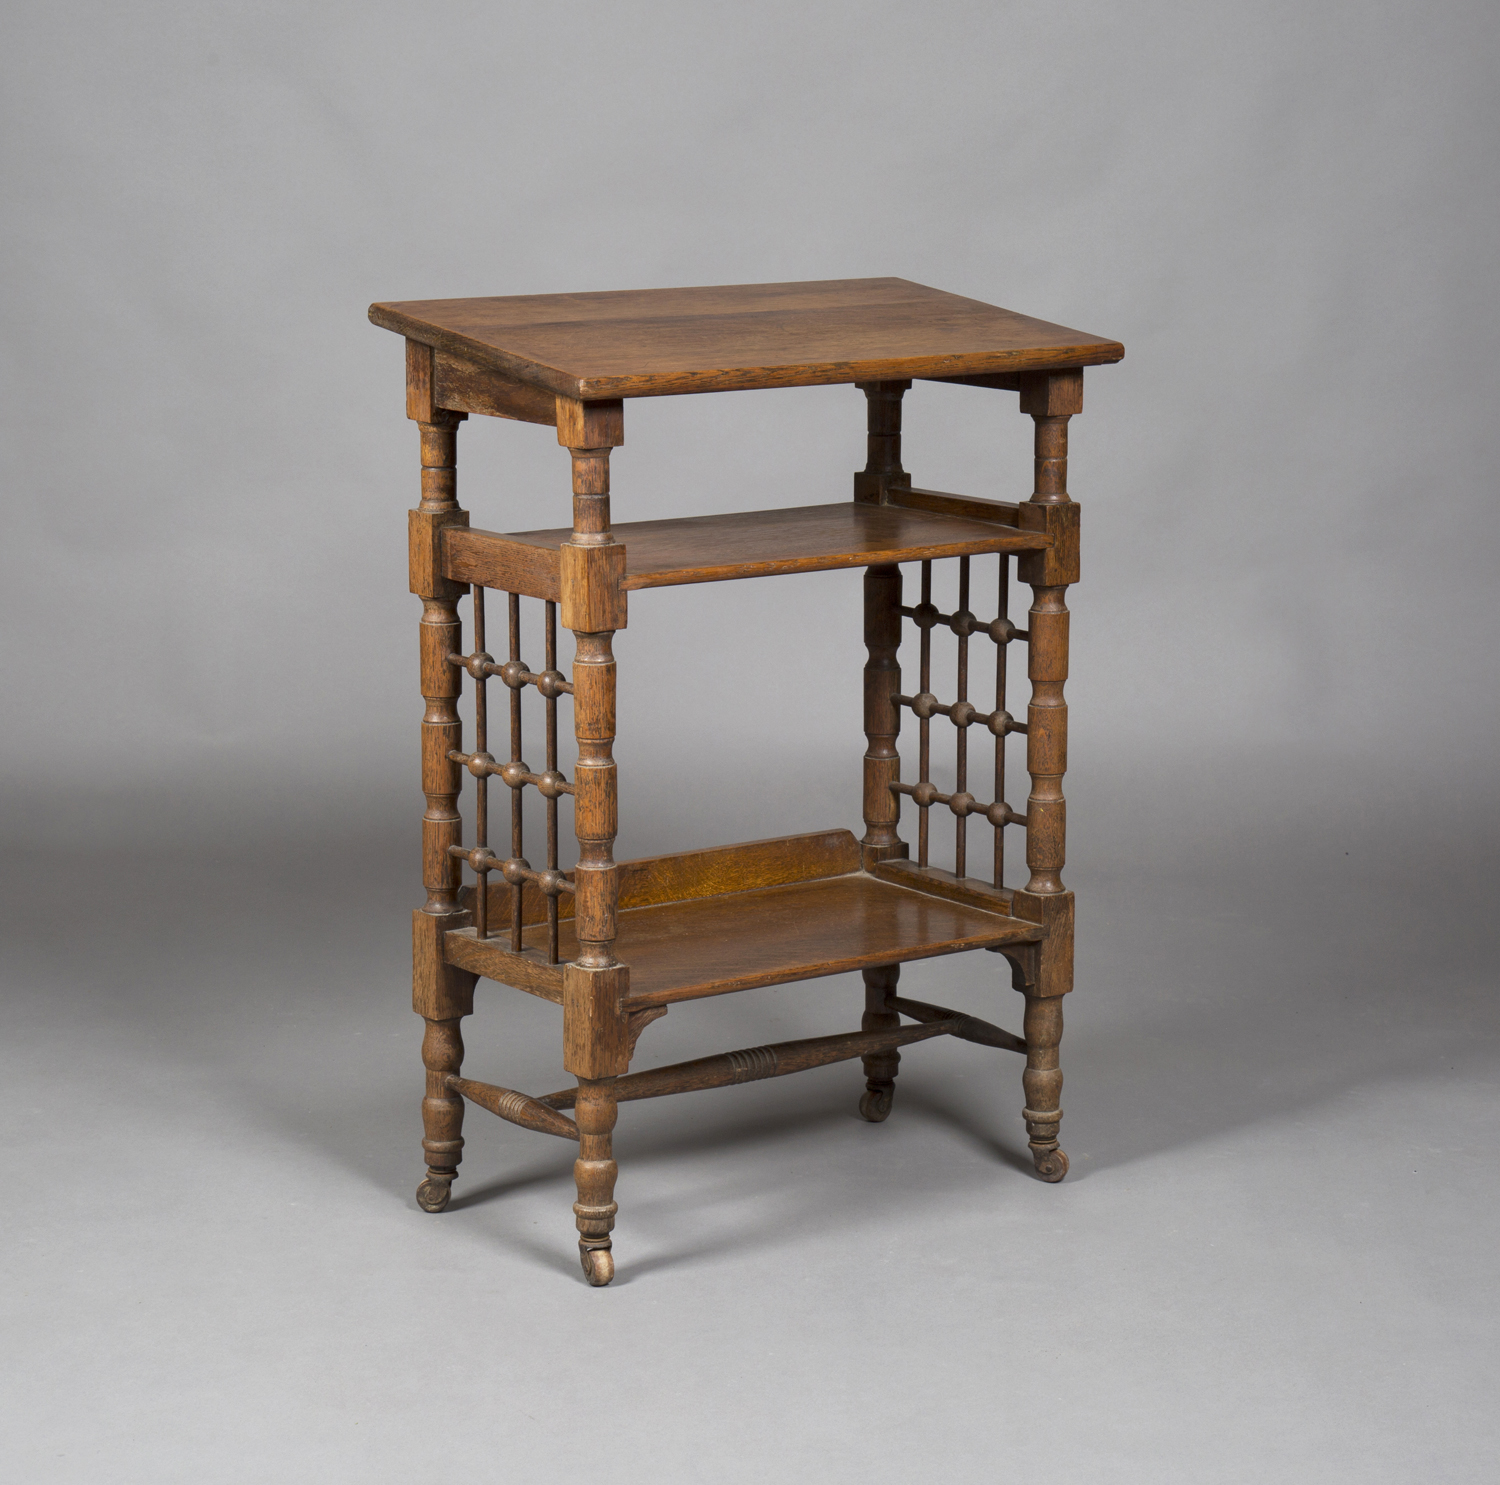 An Edwardian Arts and Crafts oak reading table, designed by Leonard Wyburd for Liberty & Co, the